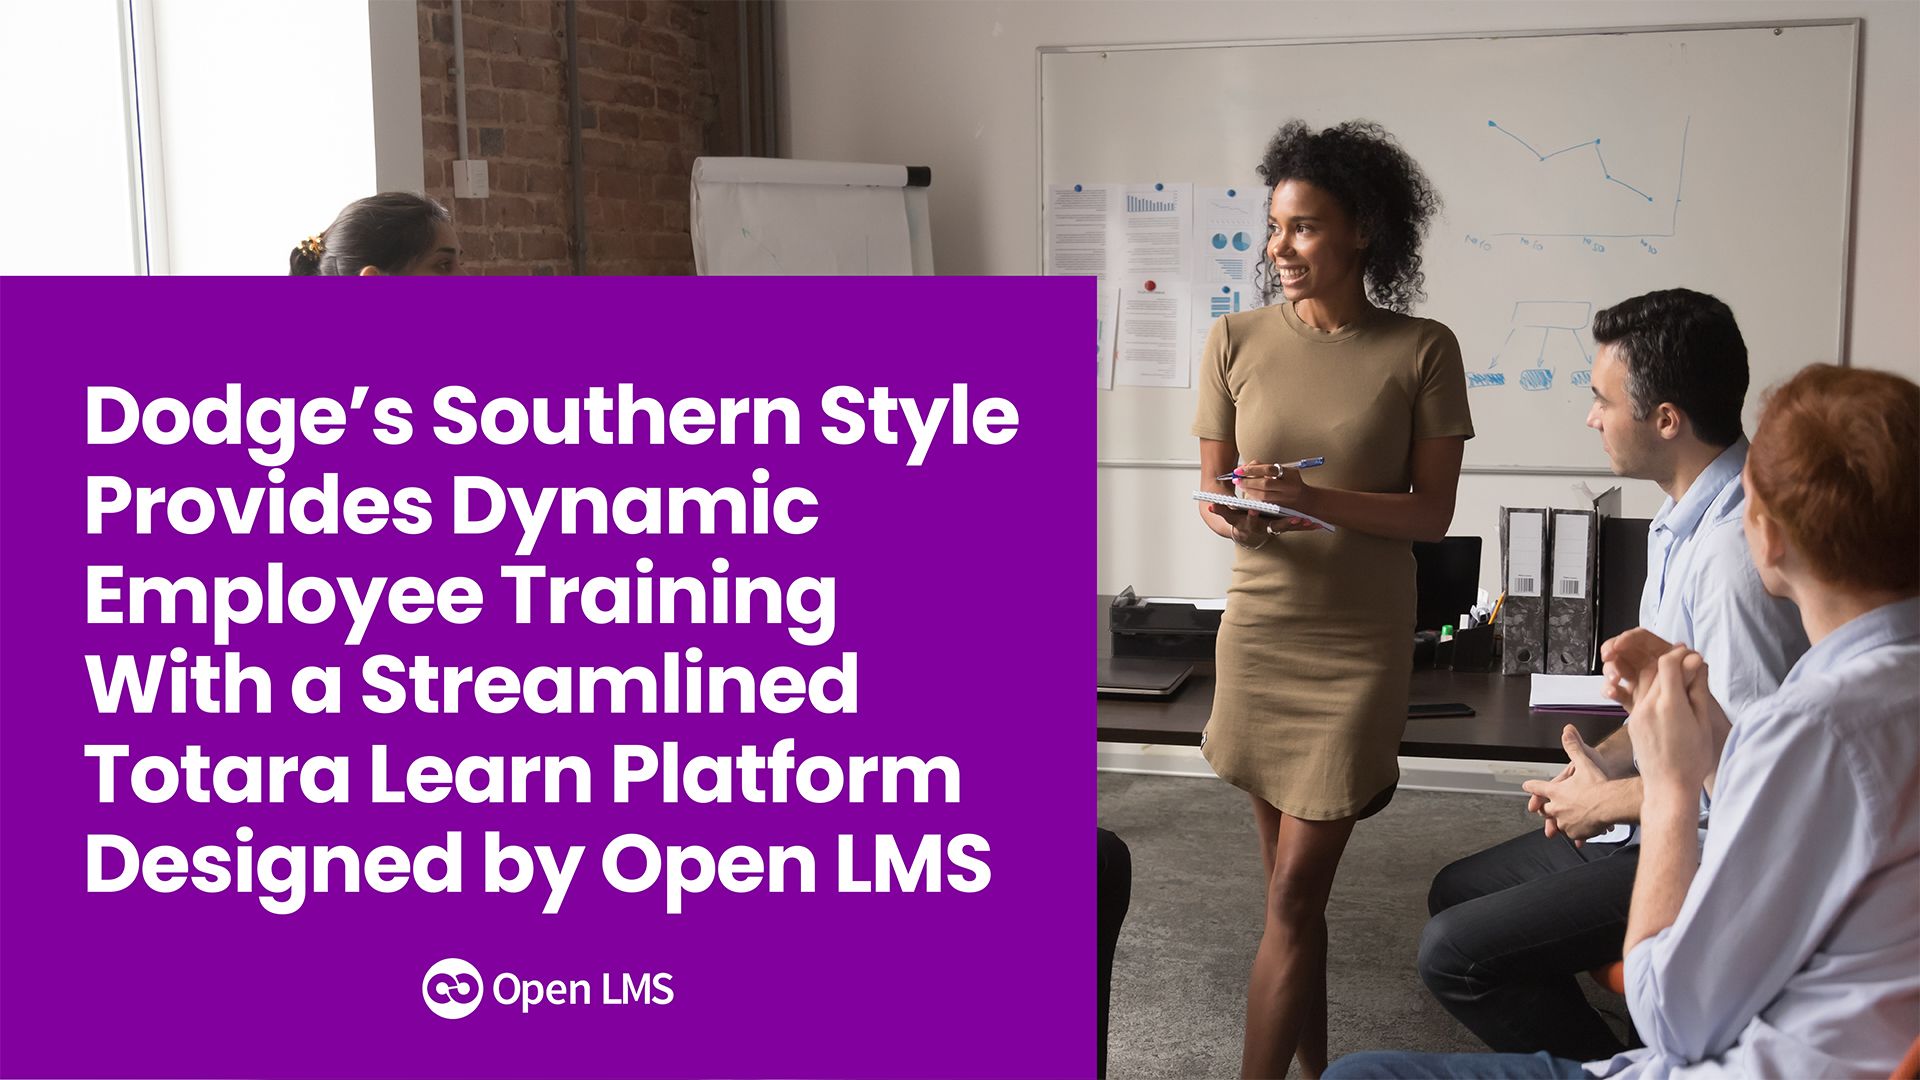 Dodge’s Southern Style Provides Dynamic Employee Training With a Streamlined Totara Learn Platform Designed by Open LMS